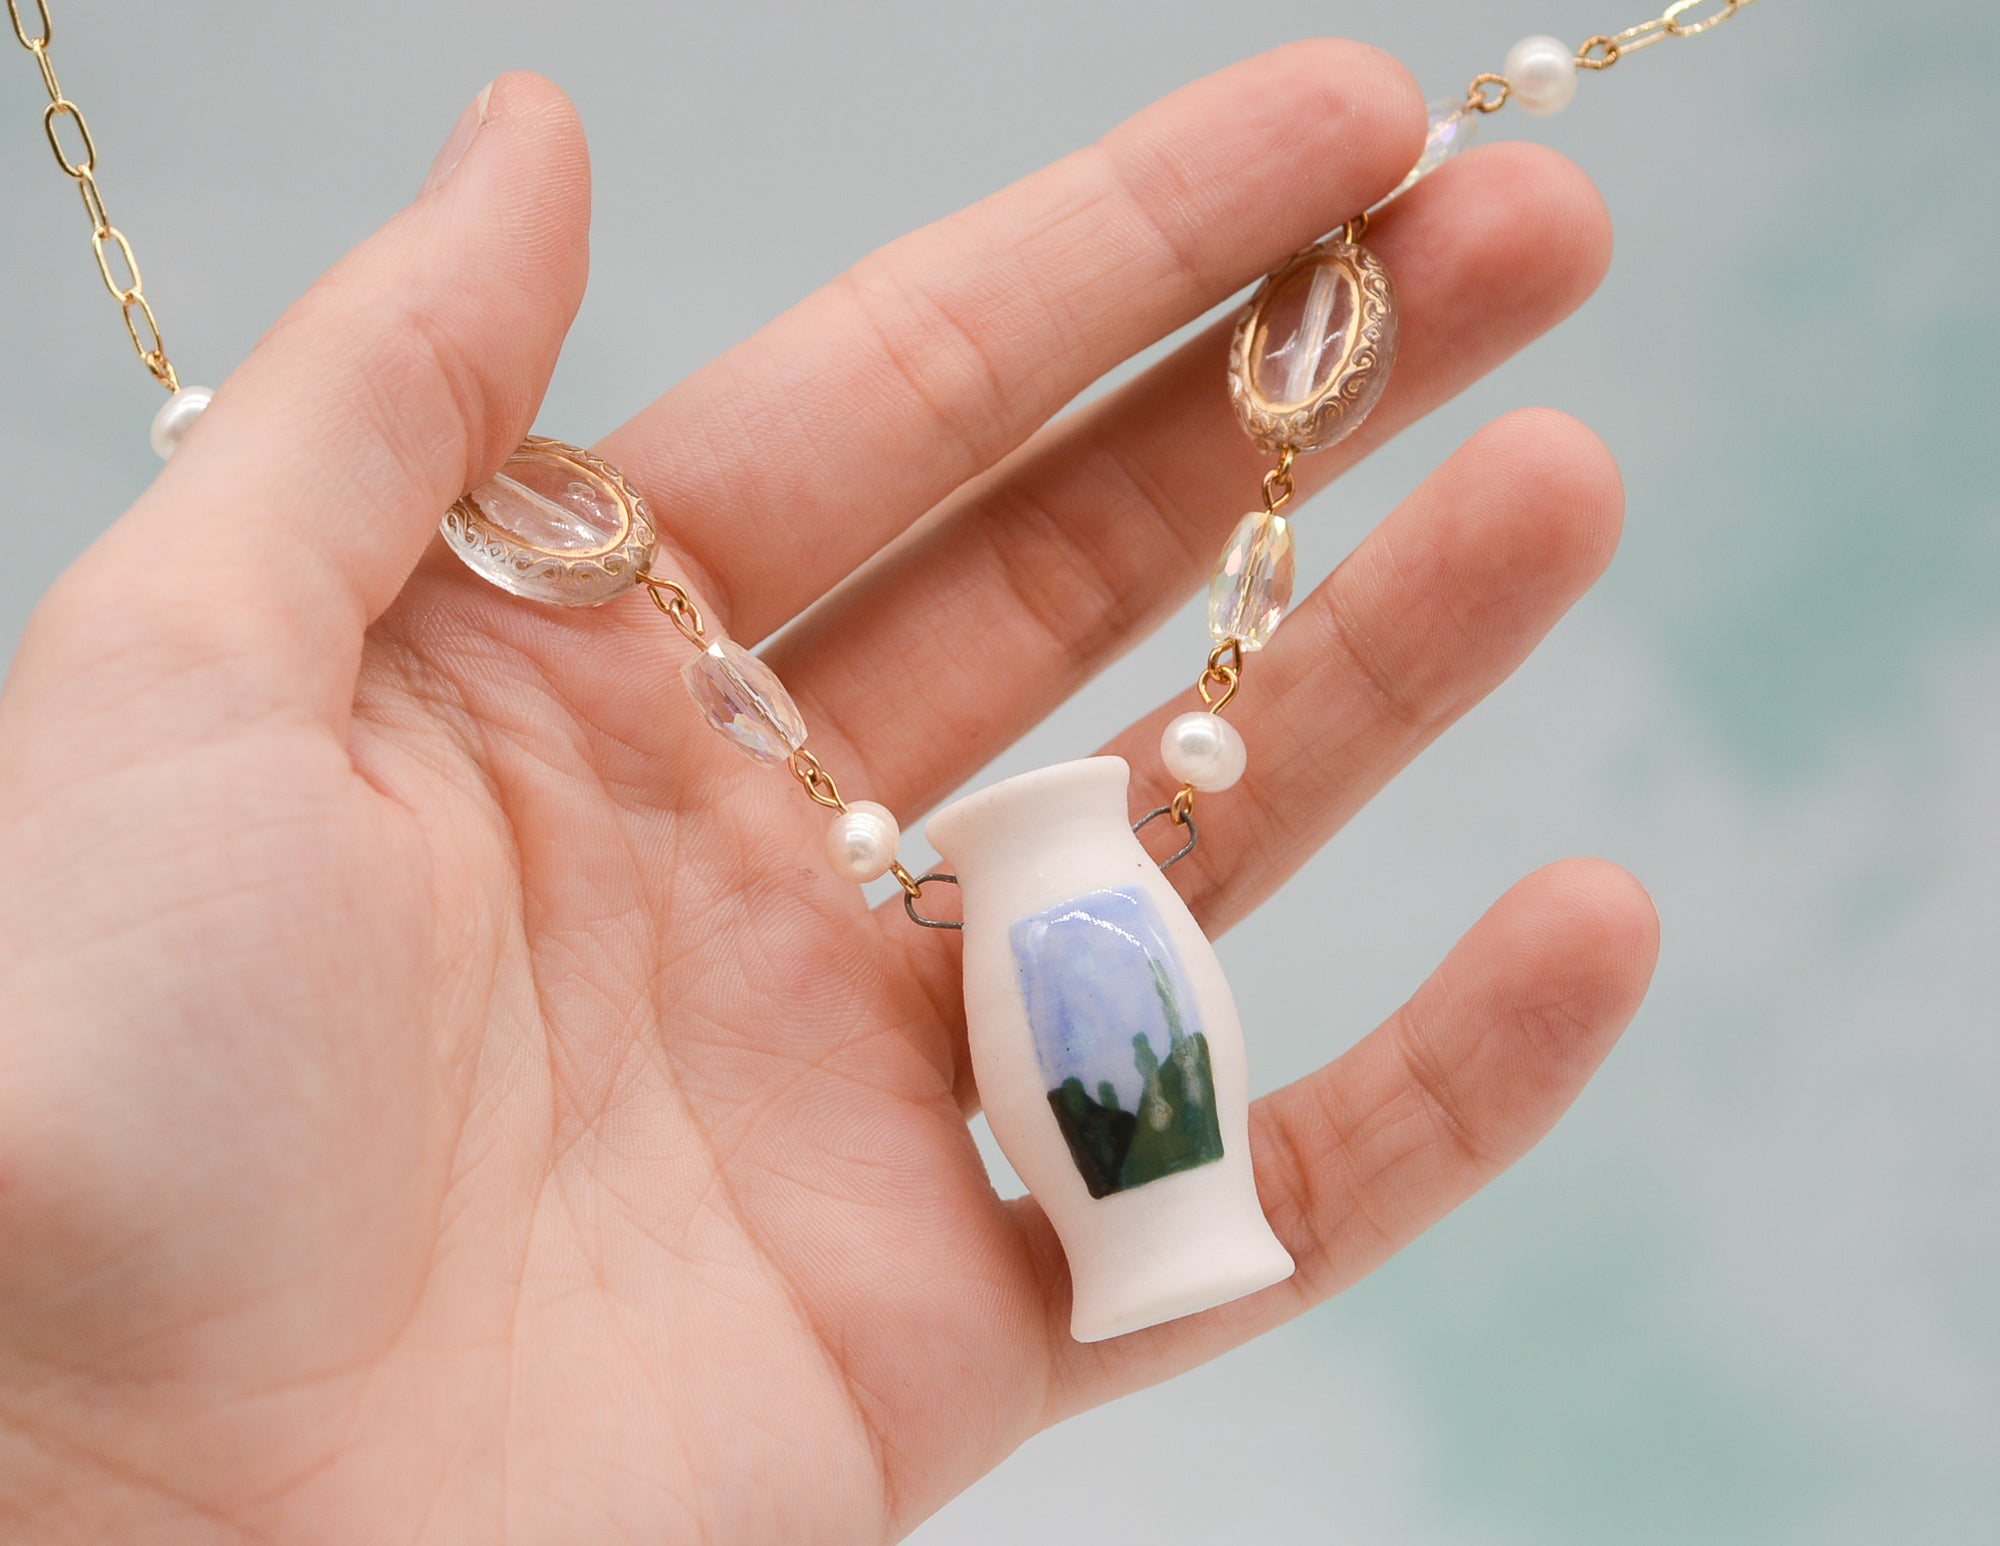 Countryside Pot Necklace